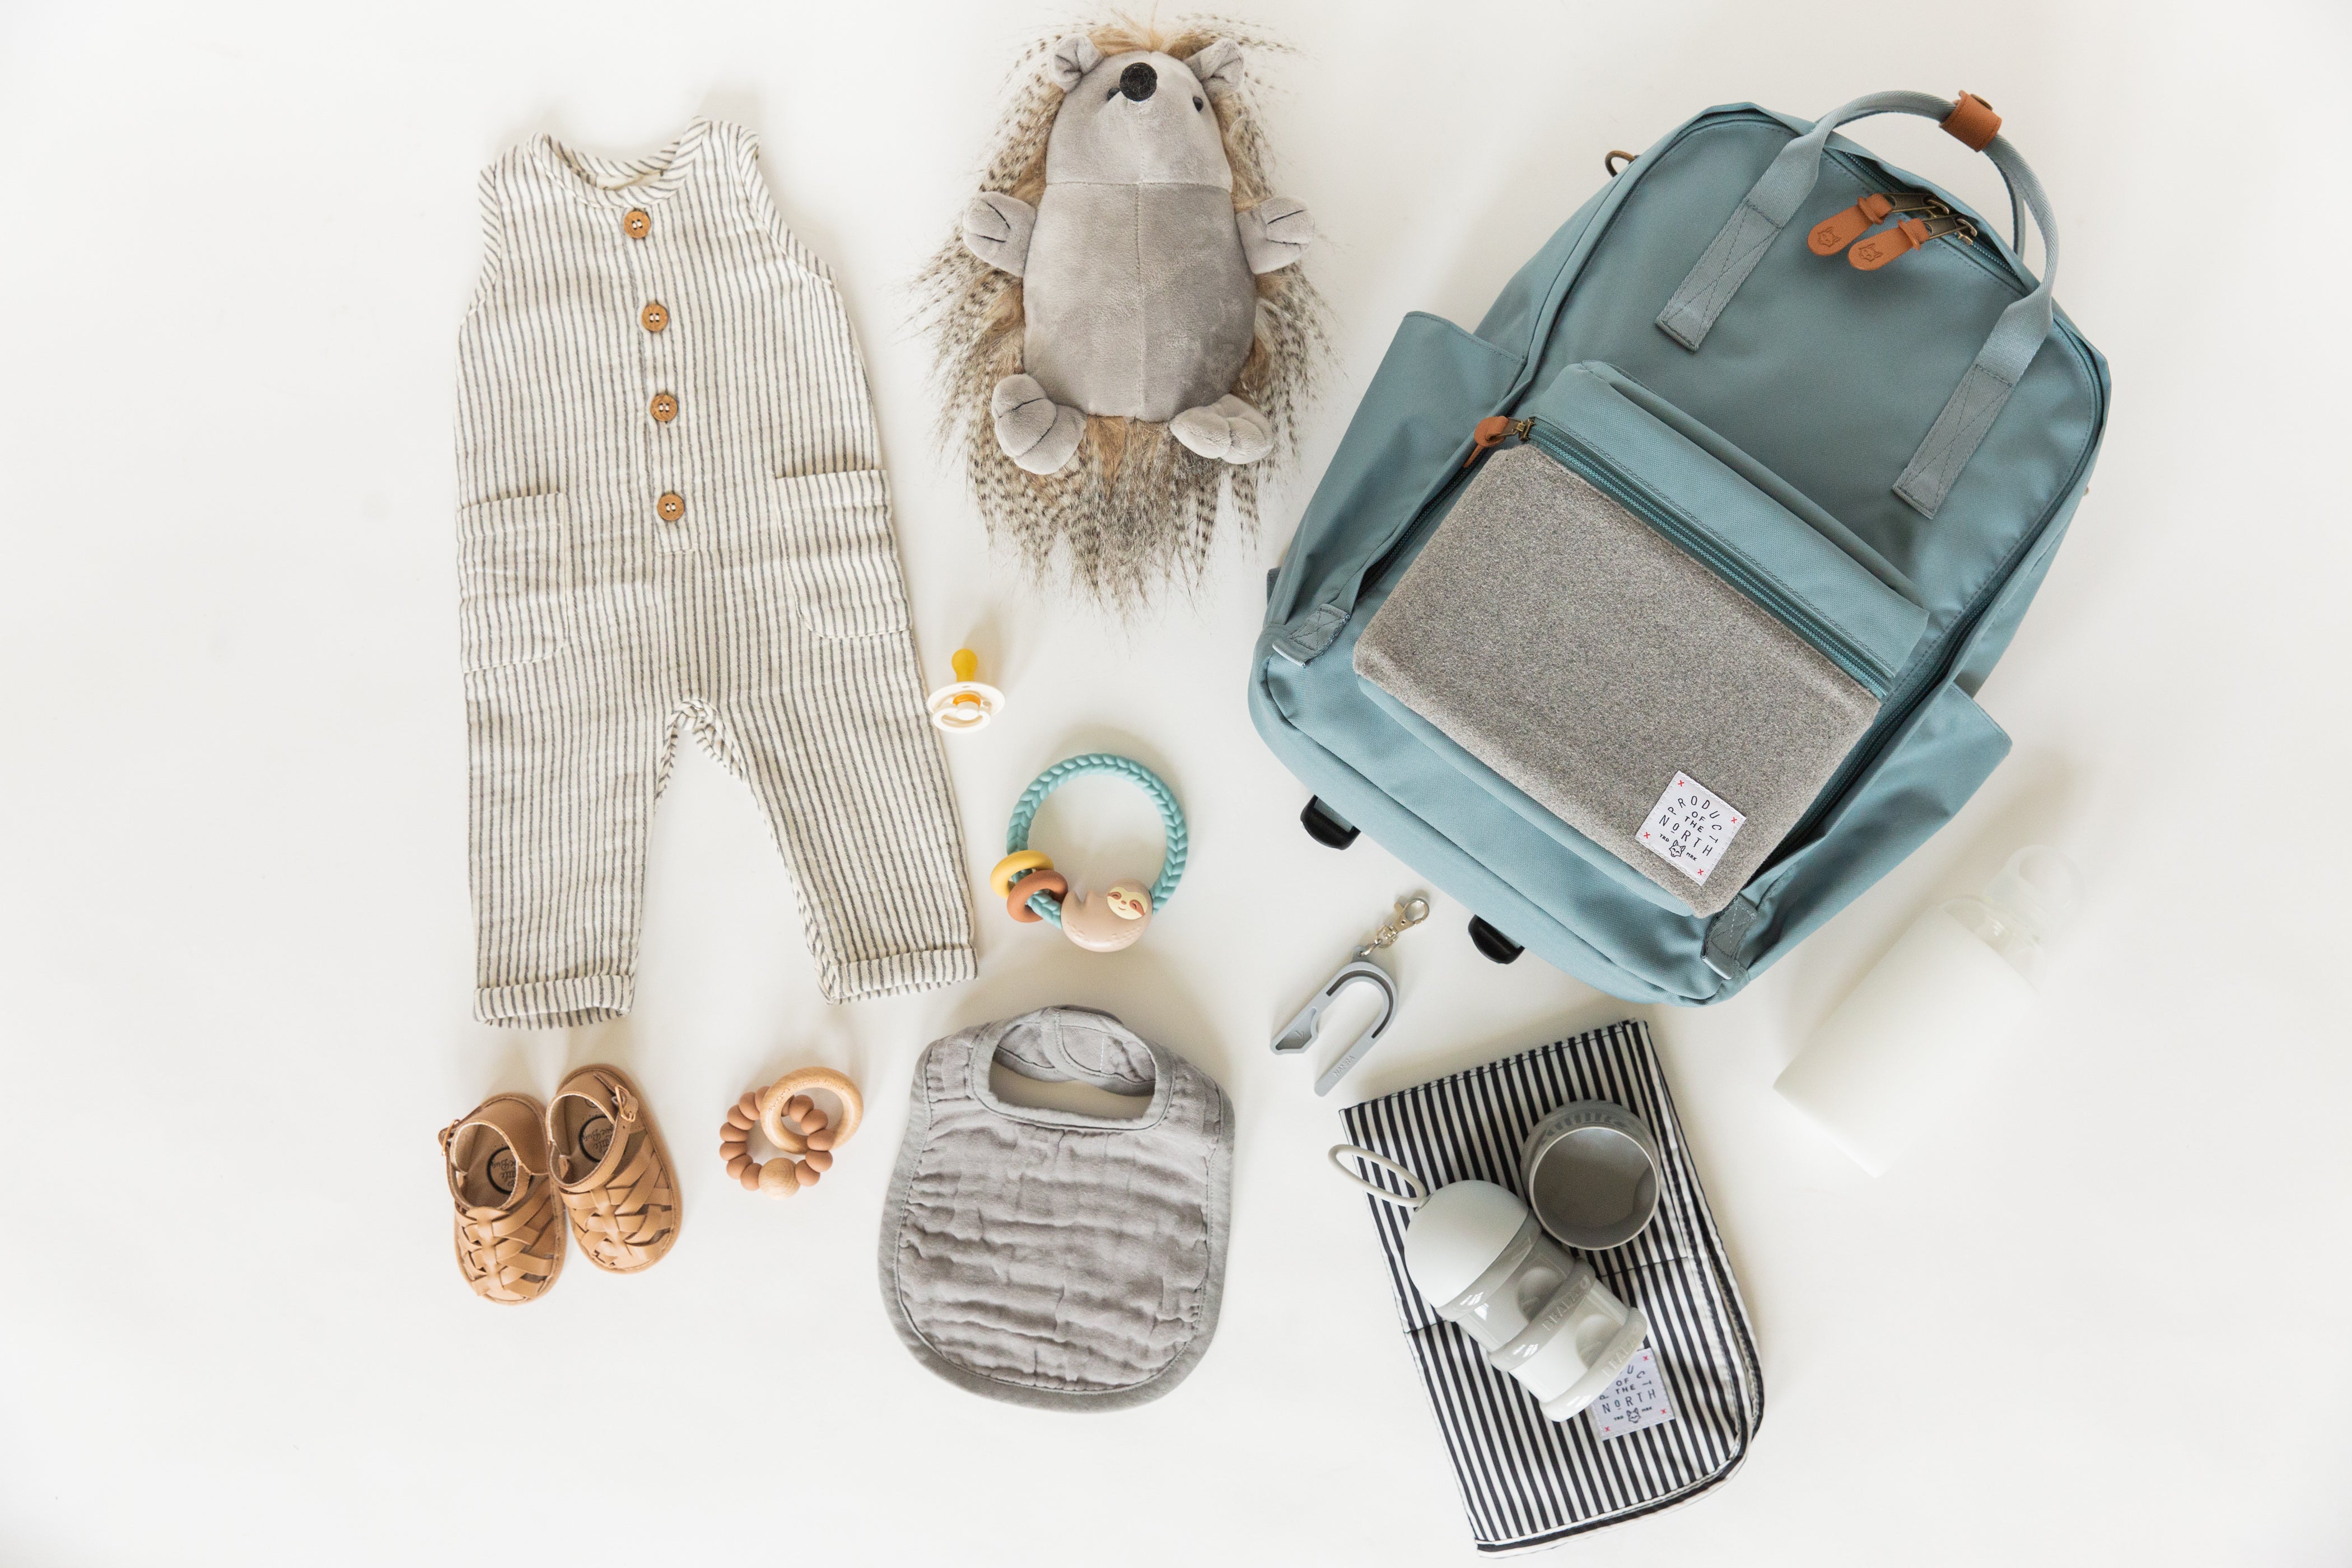 The Experienced Mom's Guide to Packing a Diaper Bag